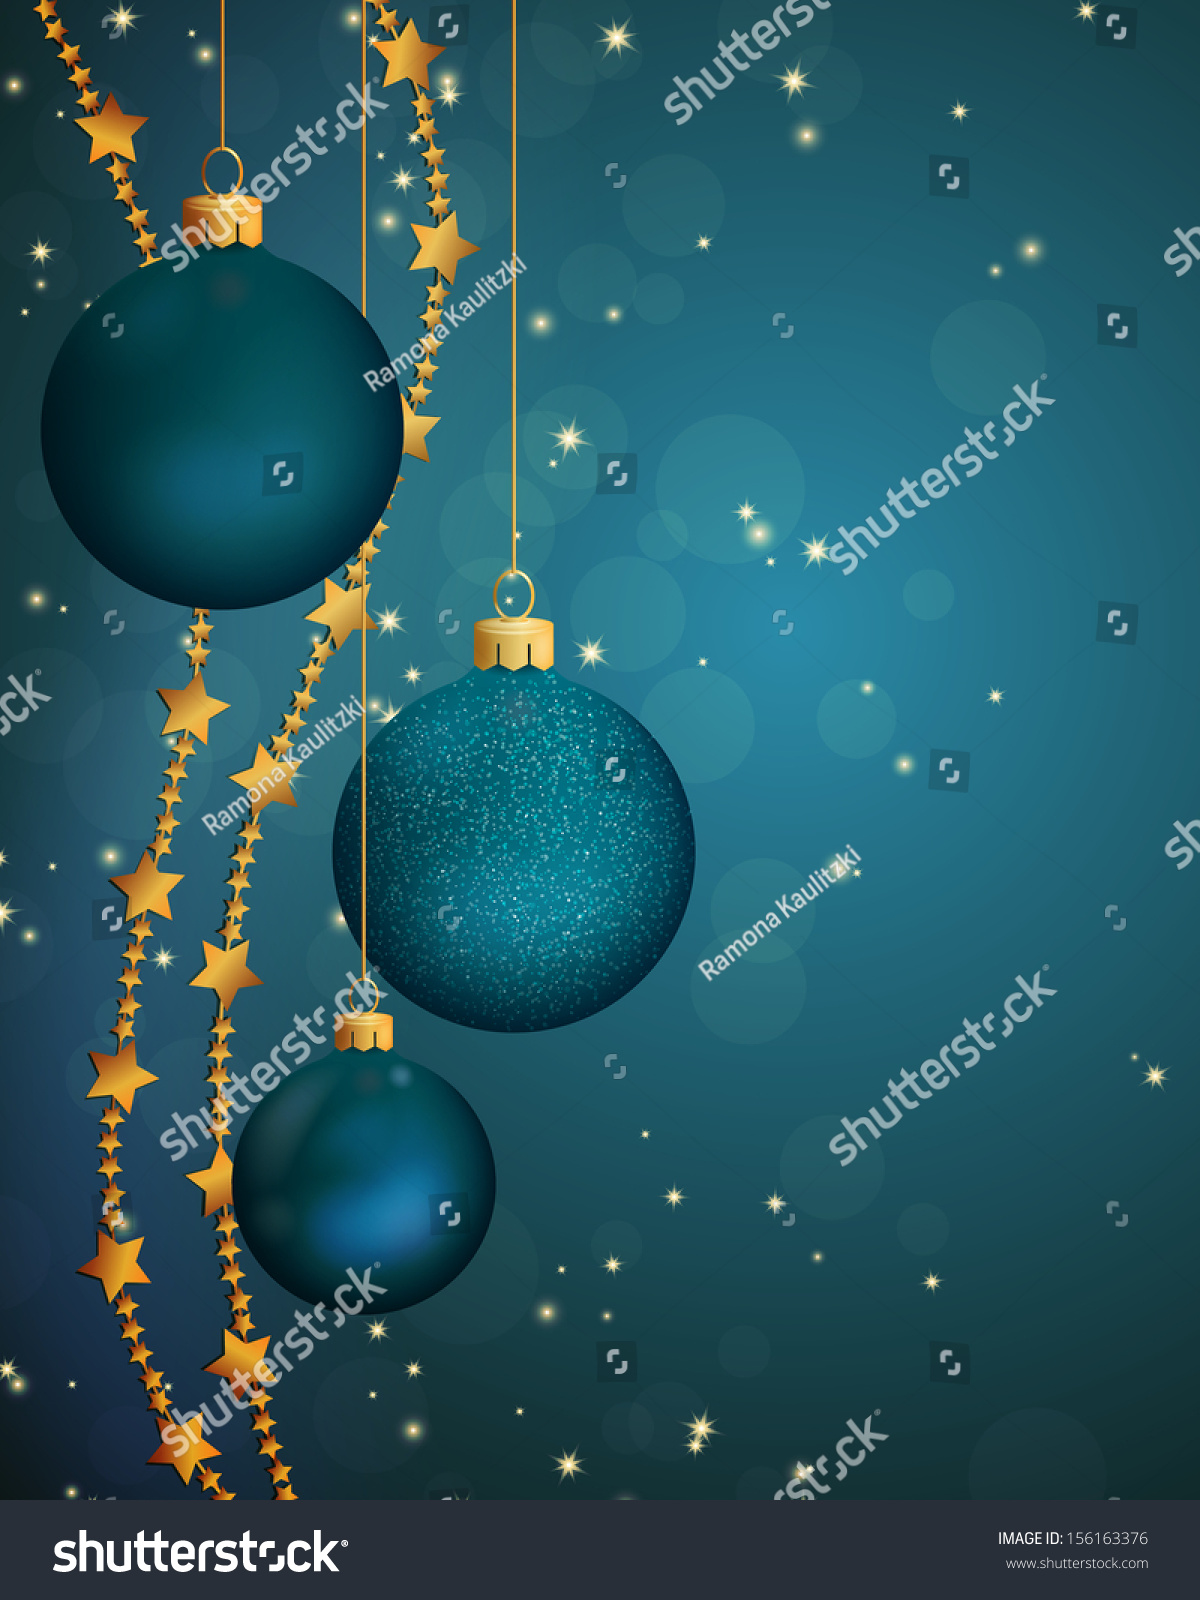 Vector Illustration Of A Decorative Christmas Background - 156163376 ...